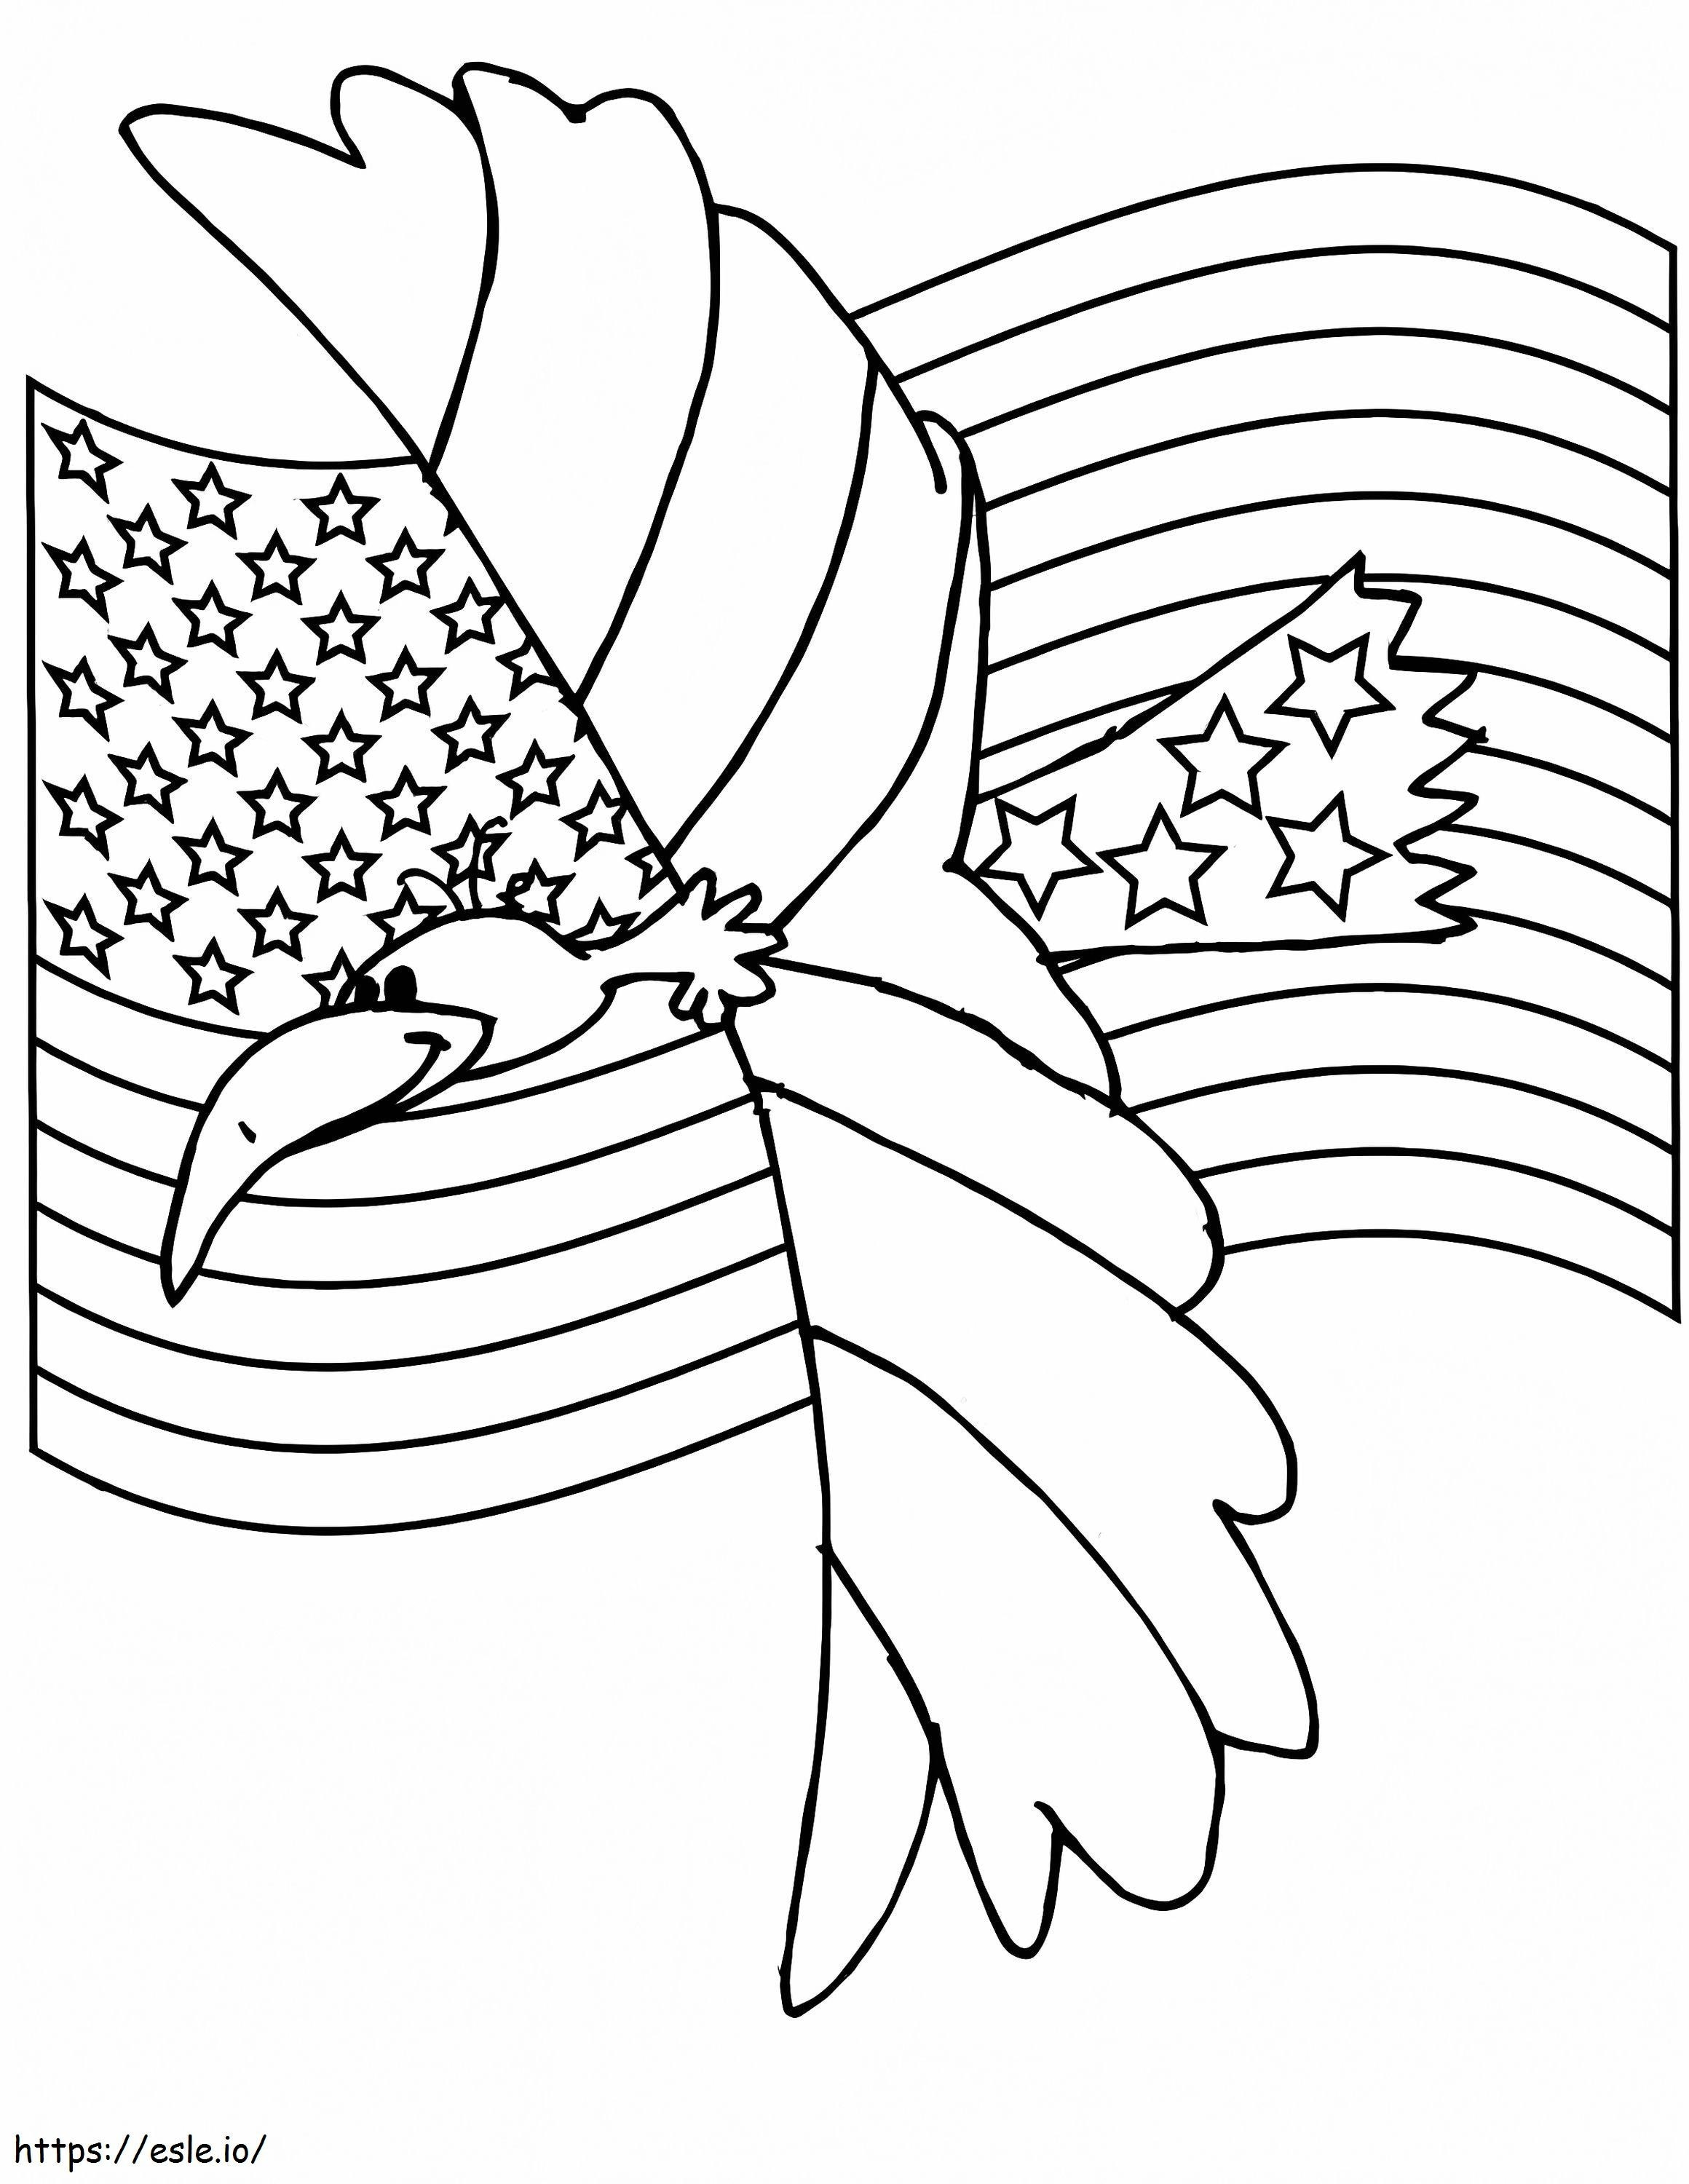 Flag Day 5 coloring page